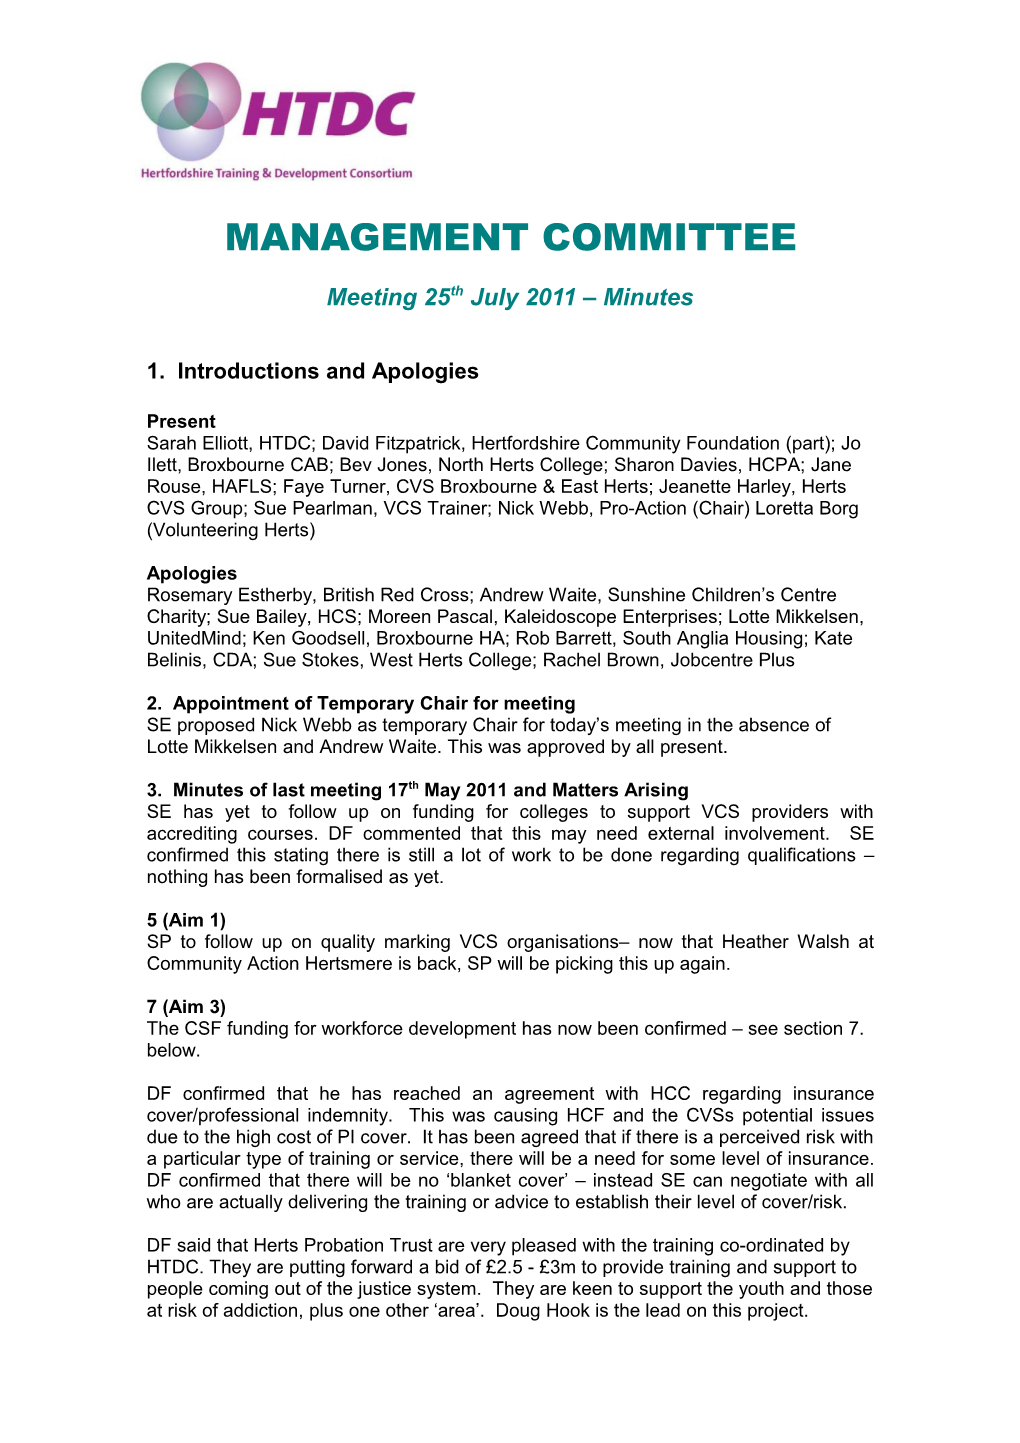 Management Committee